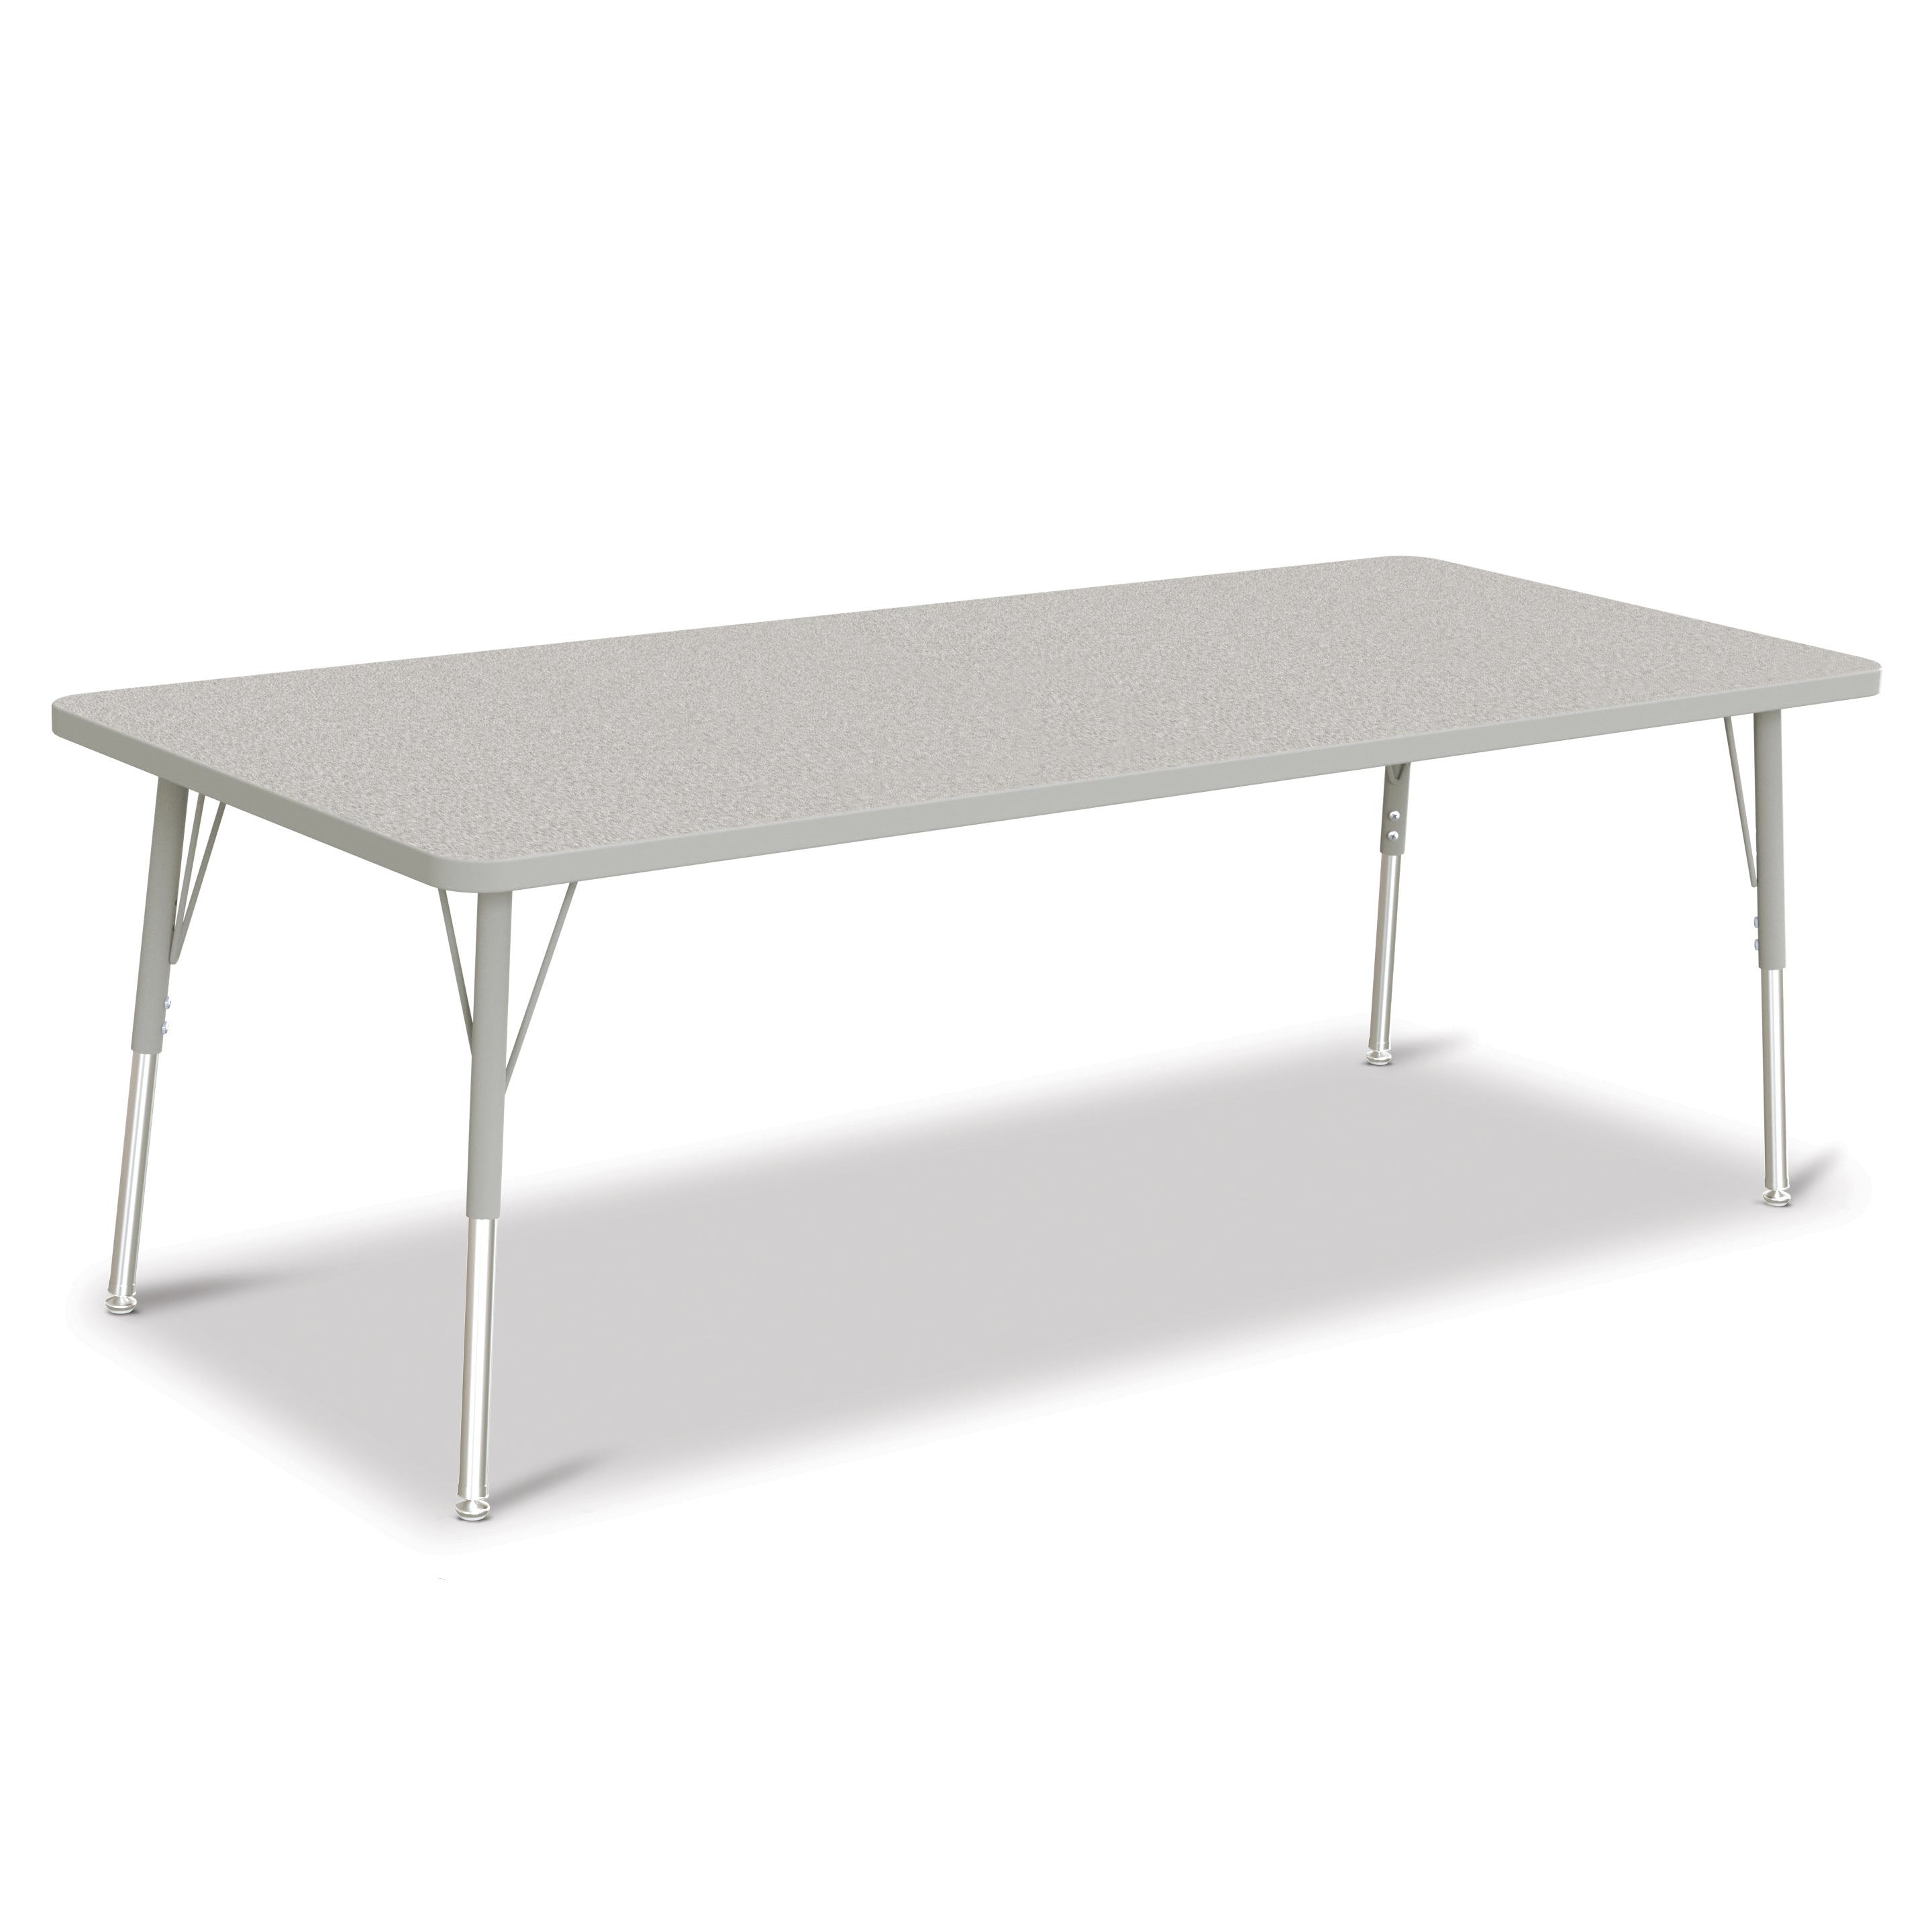 6413JCA000, Berries Rectangle Activity Table - 30" X 72", A-height - Freckled Gray/Gray/Gray